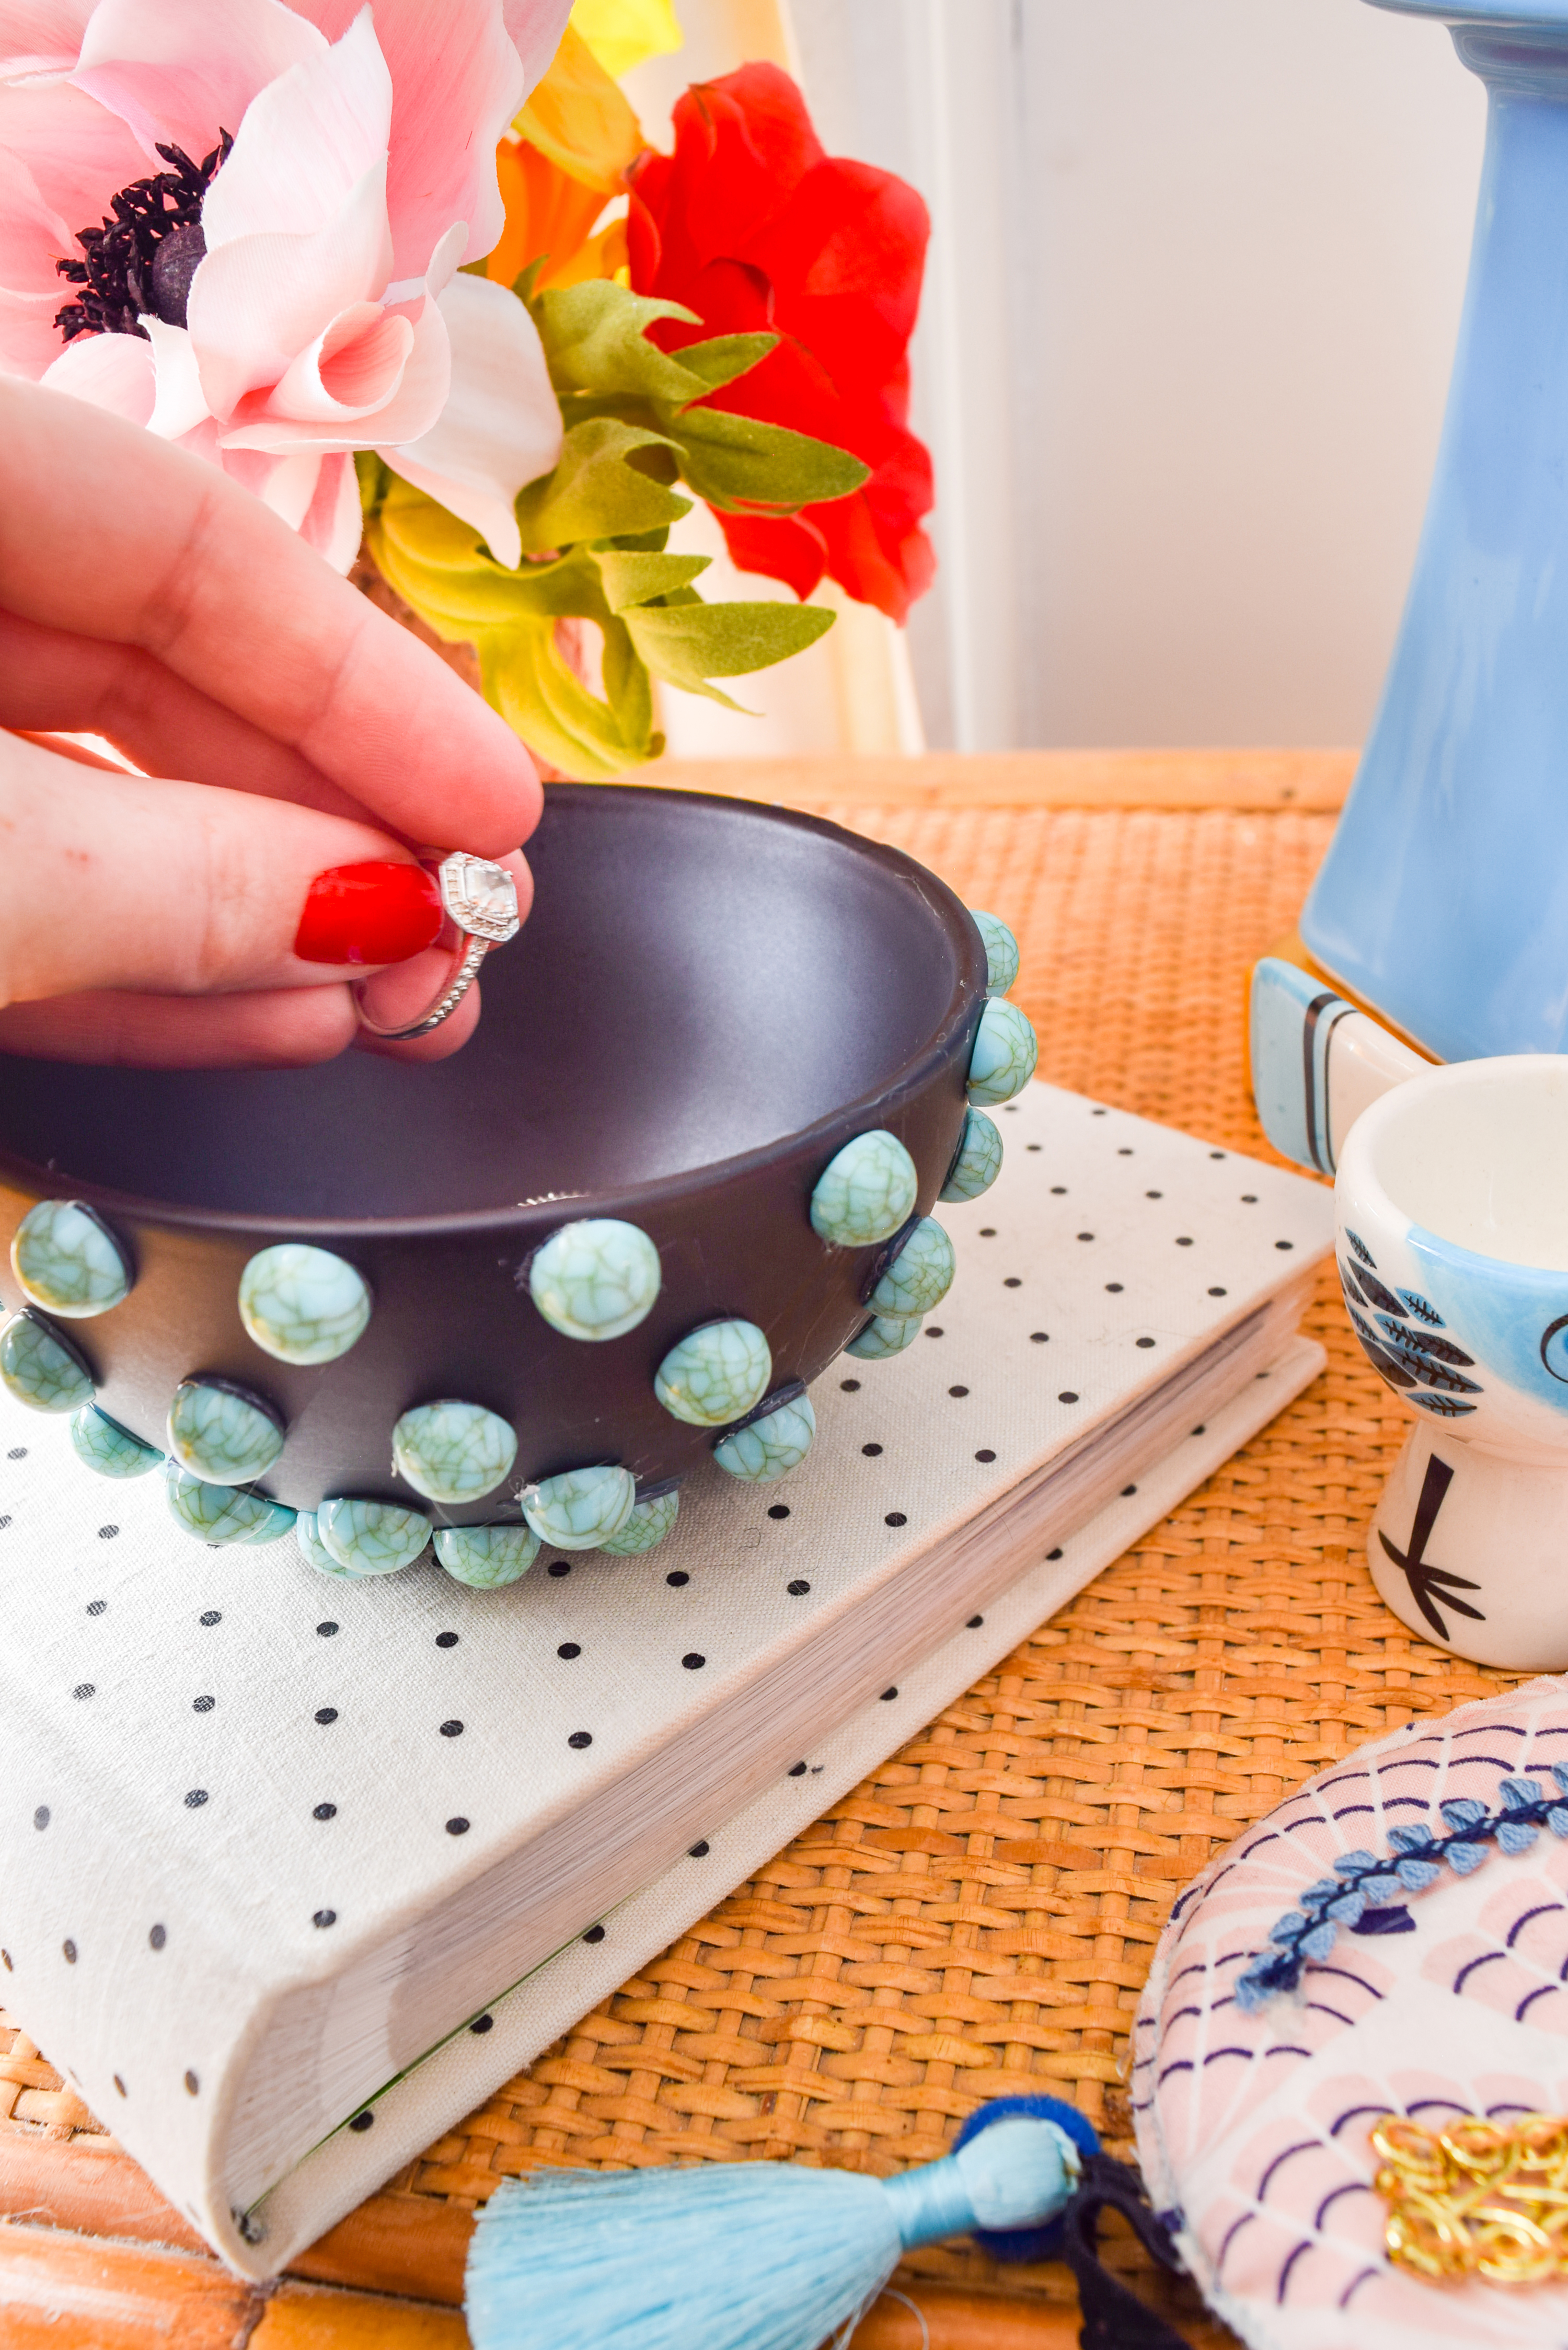 Got 10 mins and some killer beads? Check out my DIY Beaded Turquoise Jewelry Dish. All you need is a bowl and some hot glue! #quickDIY #jewelrydish